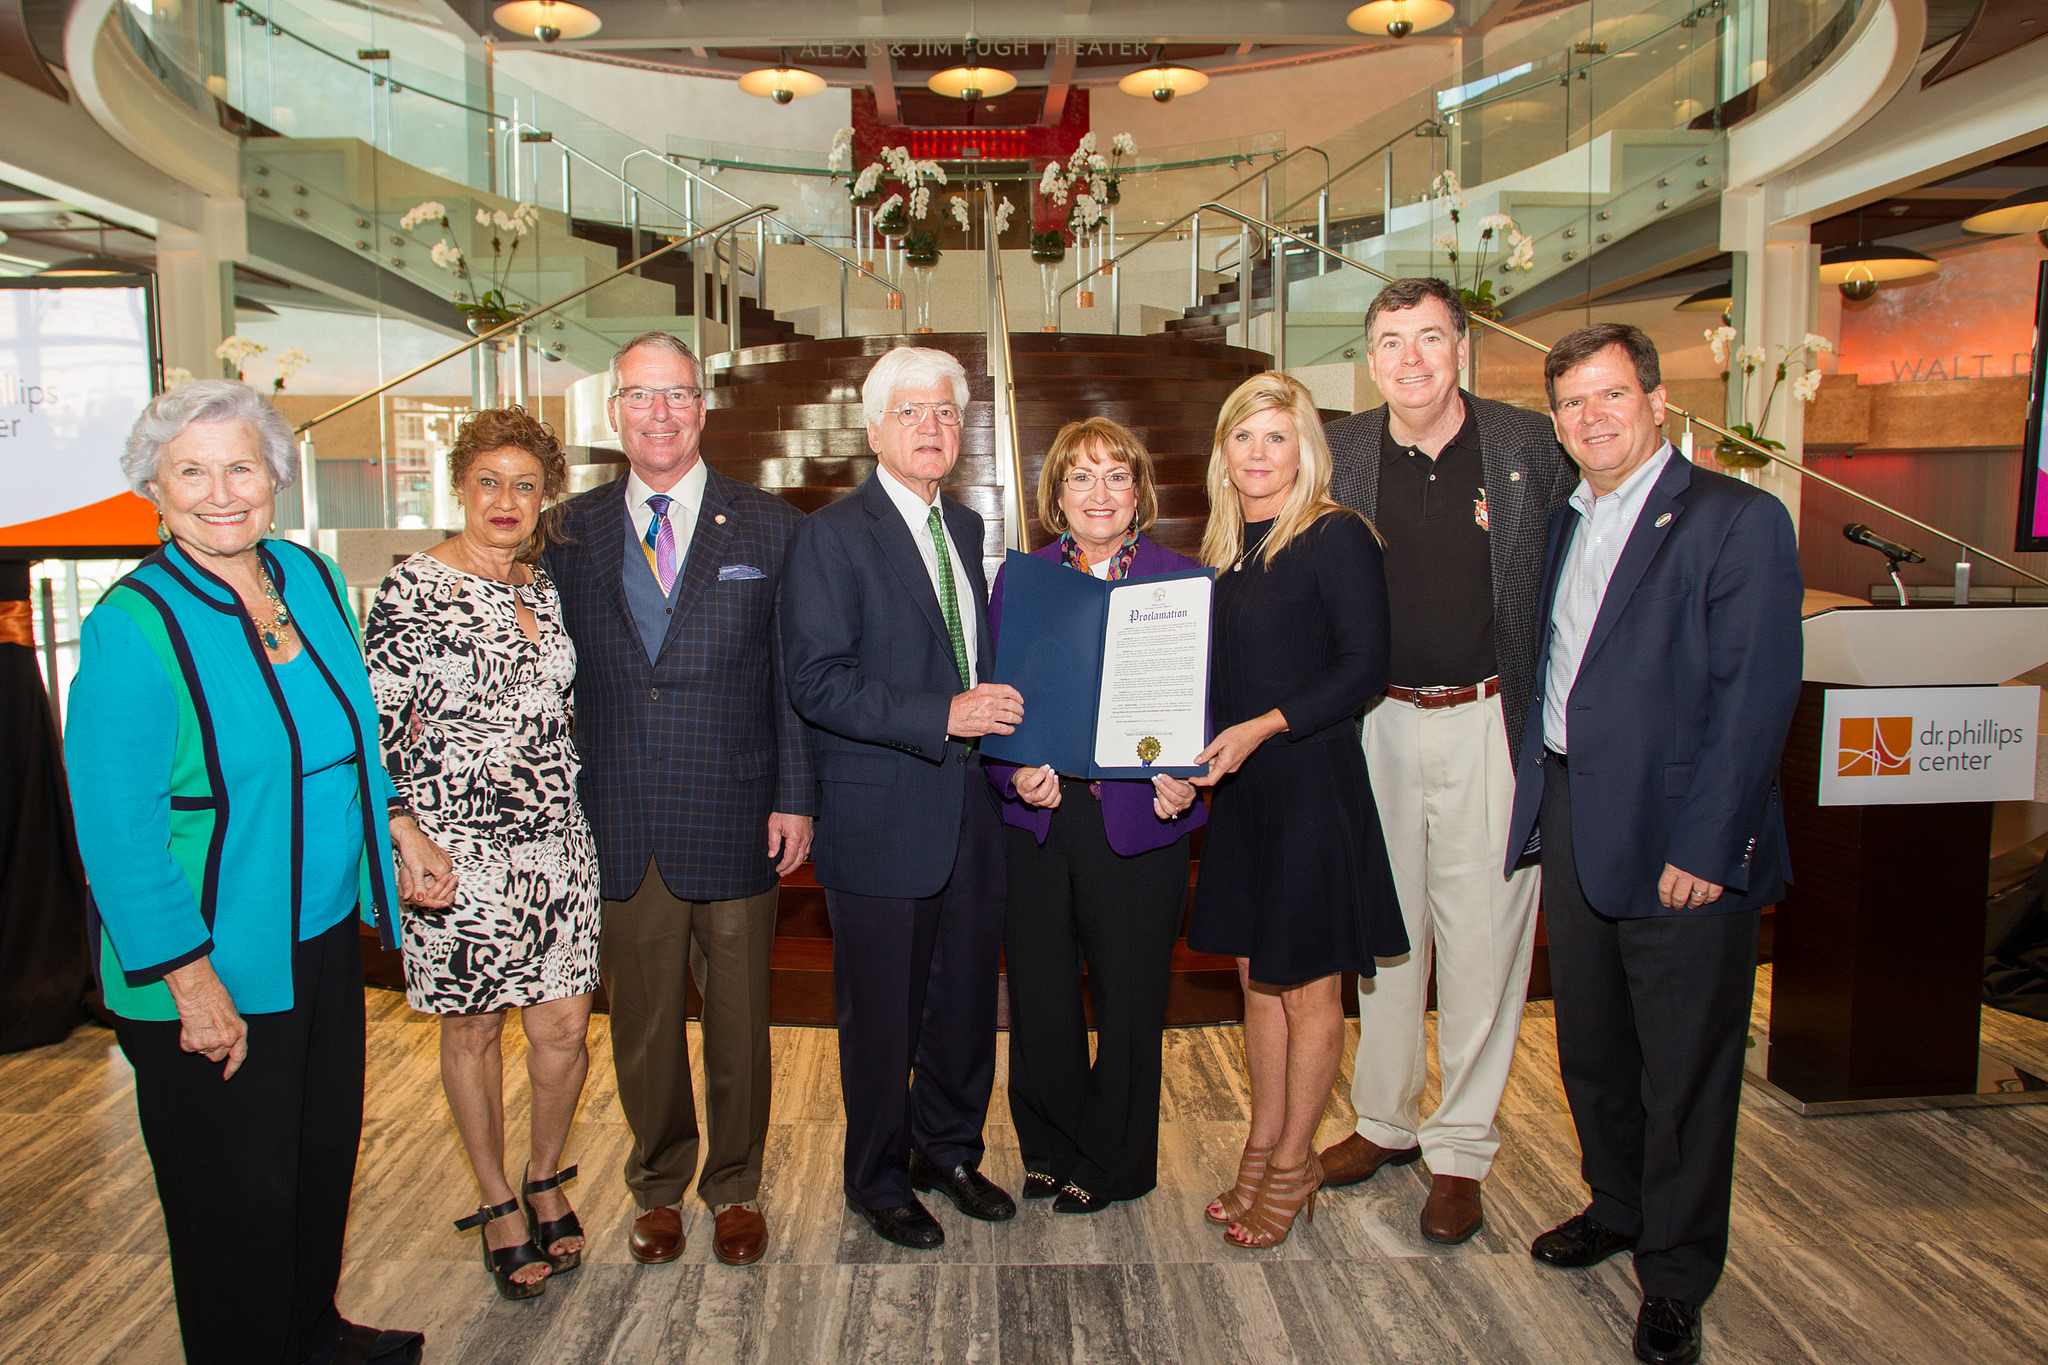 Mayor Teresa Jacobs and community leaders at the Dr. Phillips Center’s first anniversary celebration